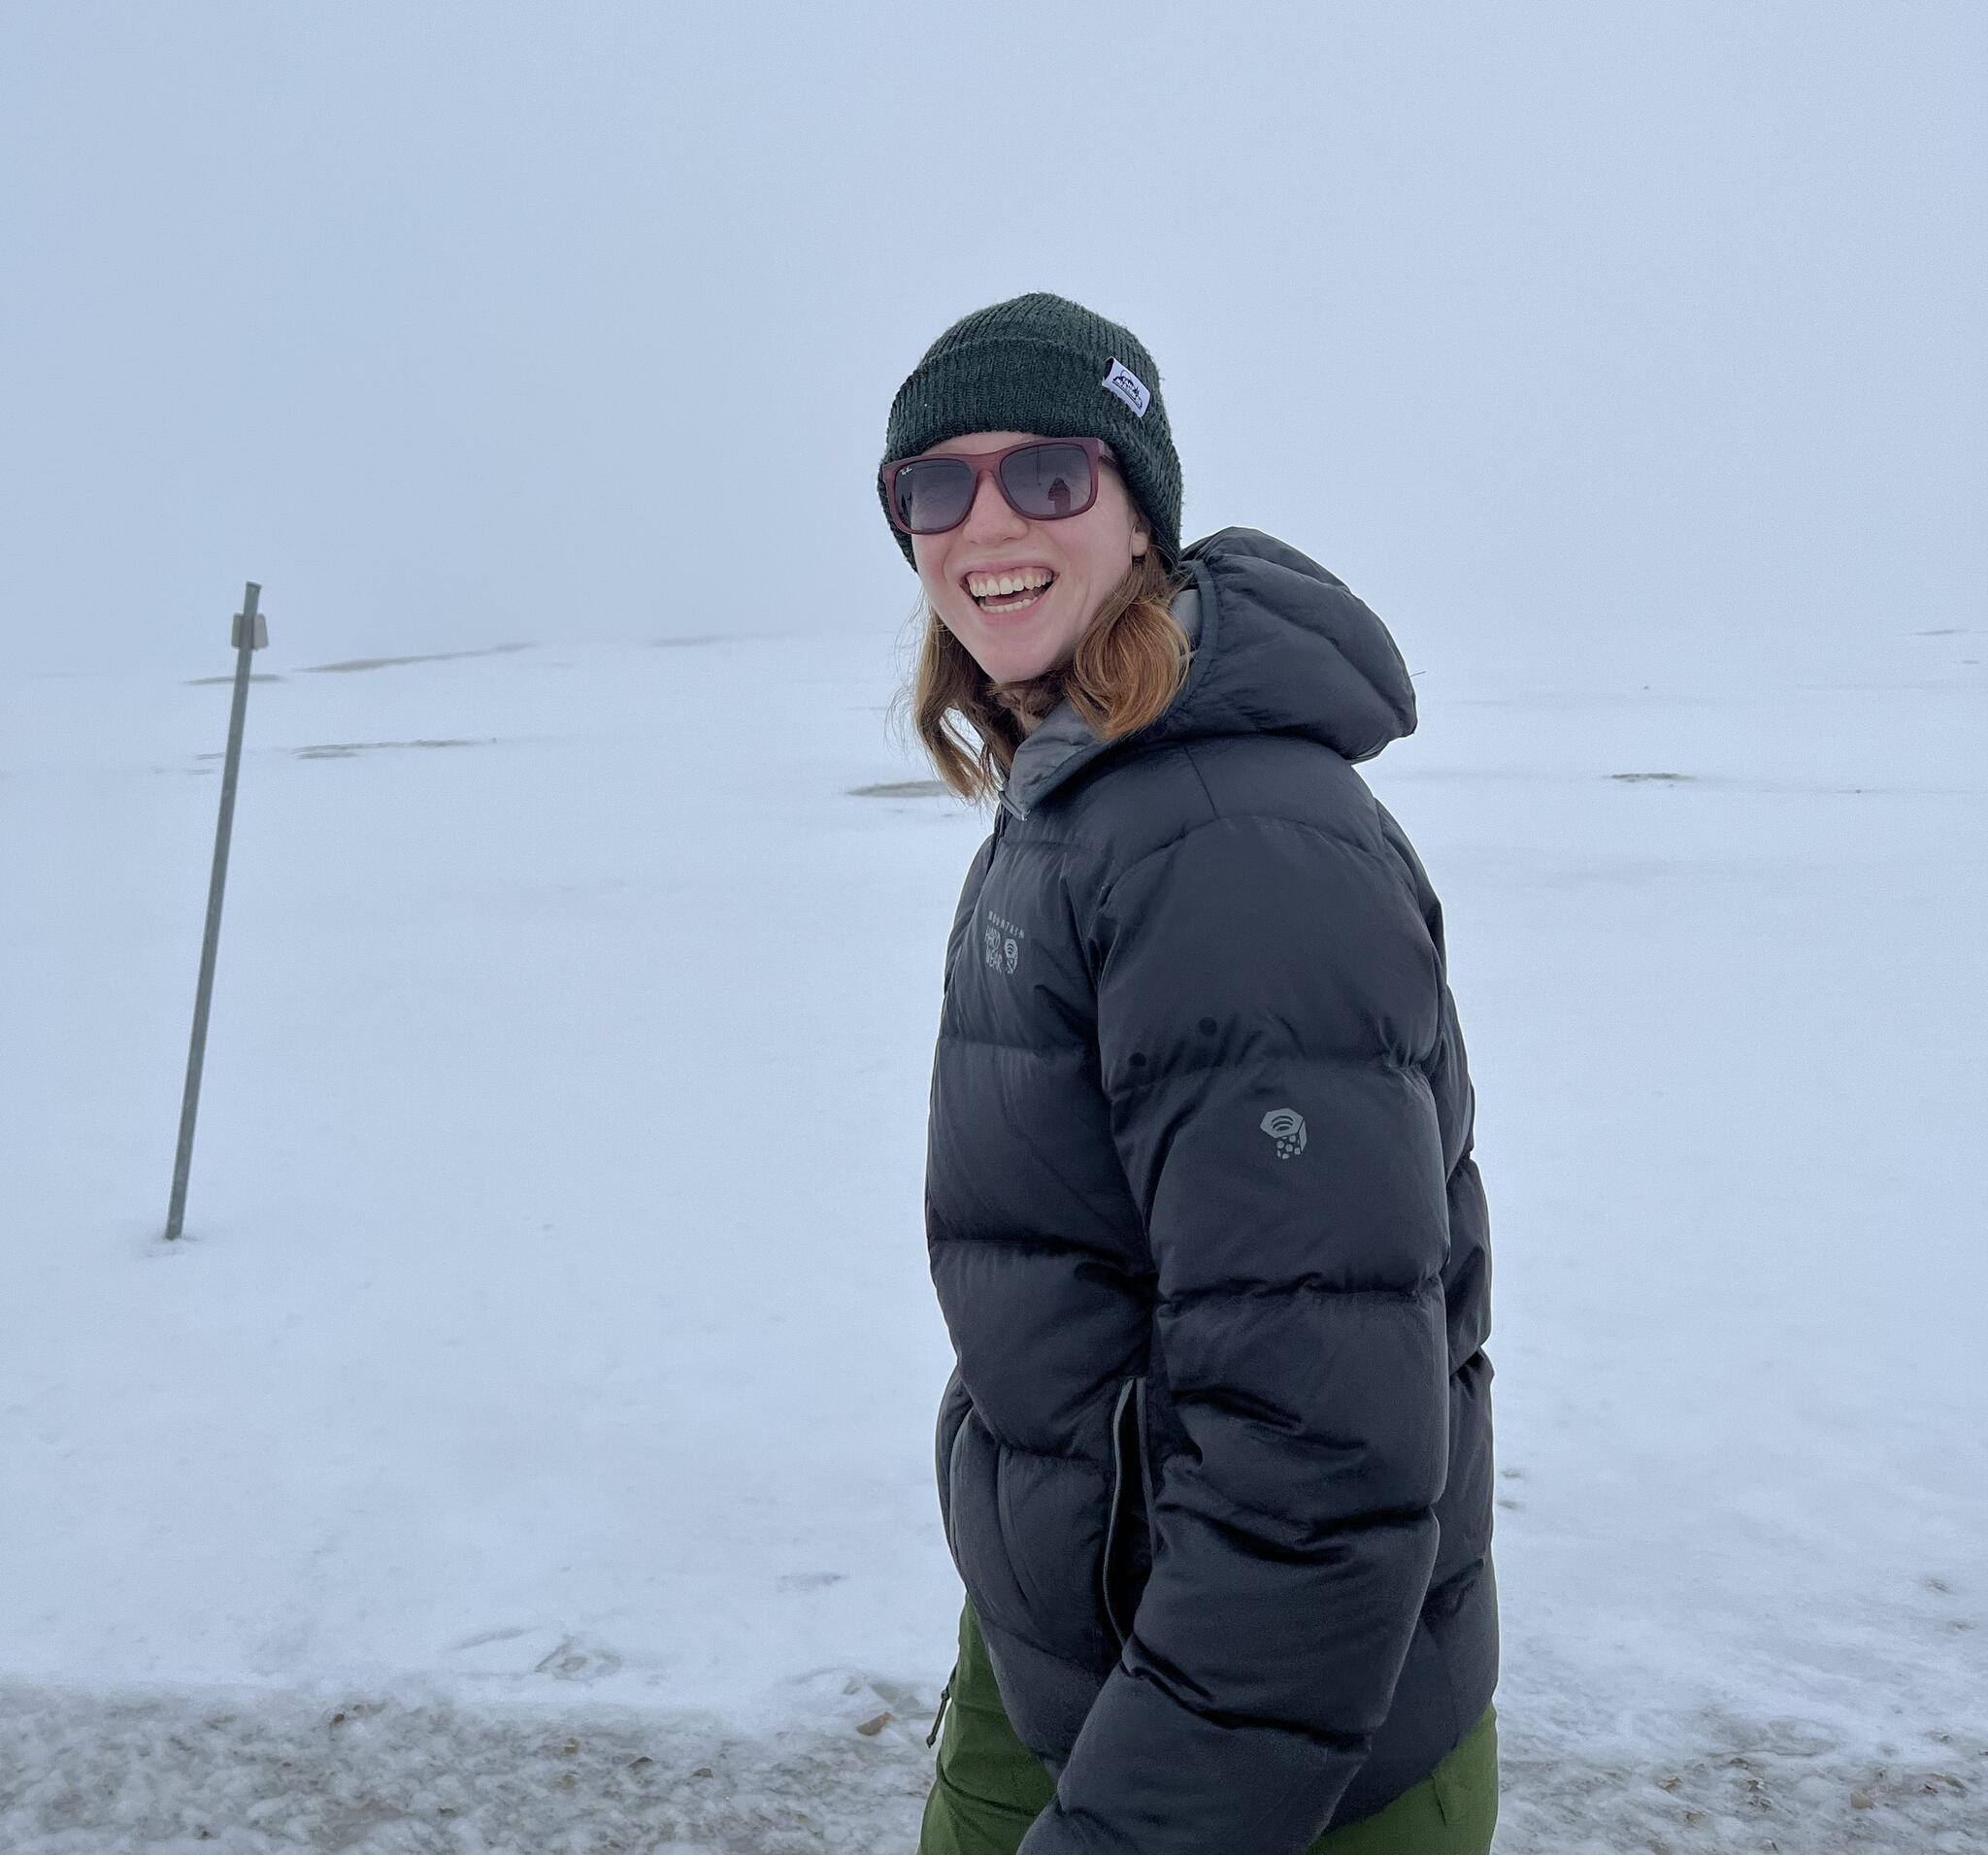 Gillian standing in a snowy environment, smiling, wearing sunglasses, a black winter coat, a green hat, and green pants. 